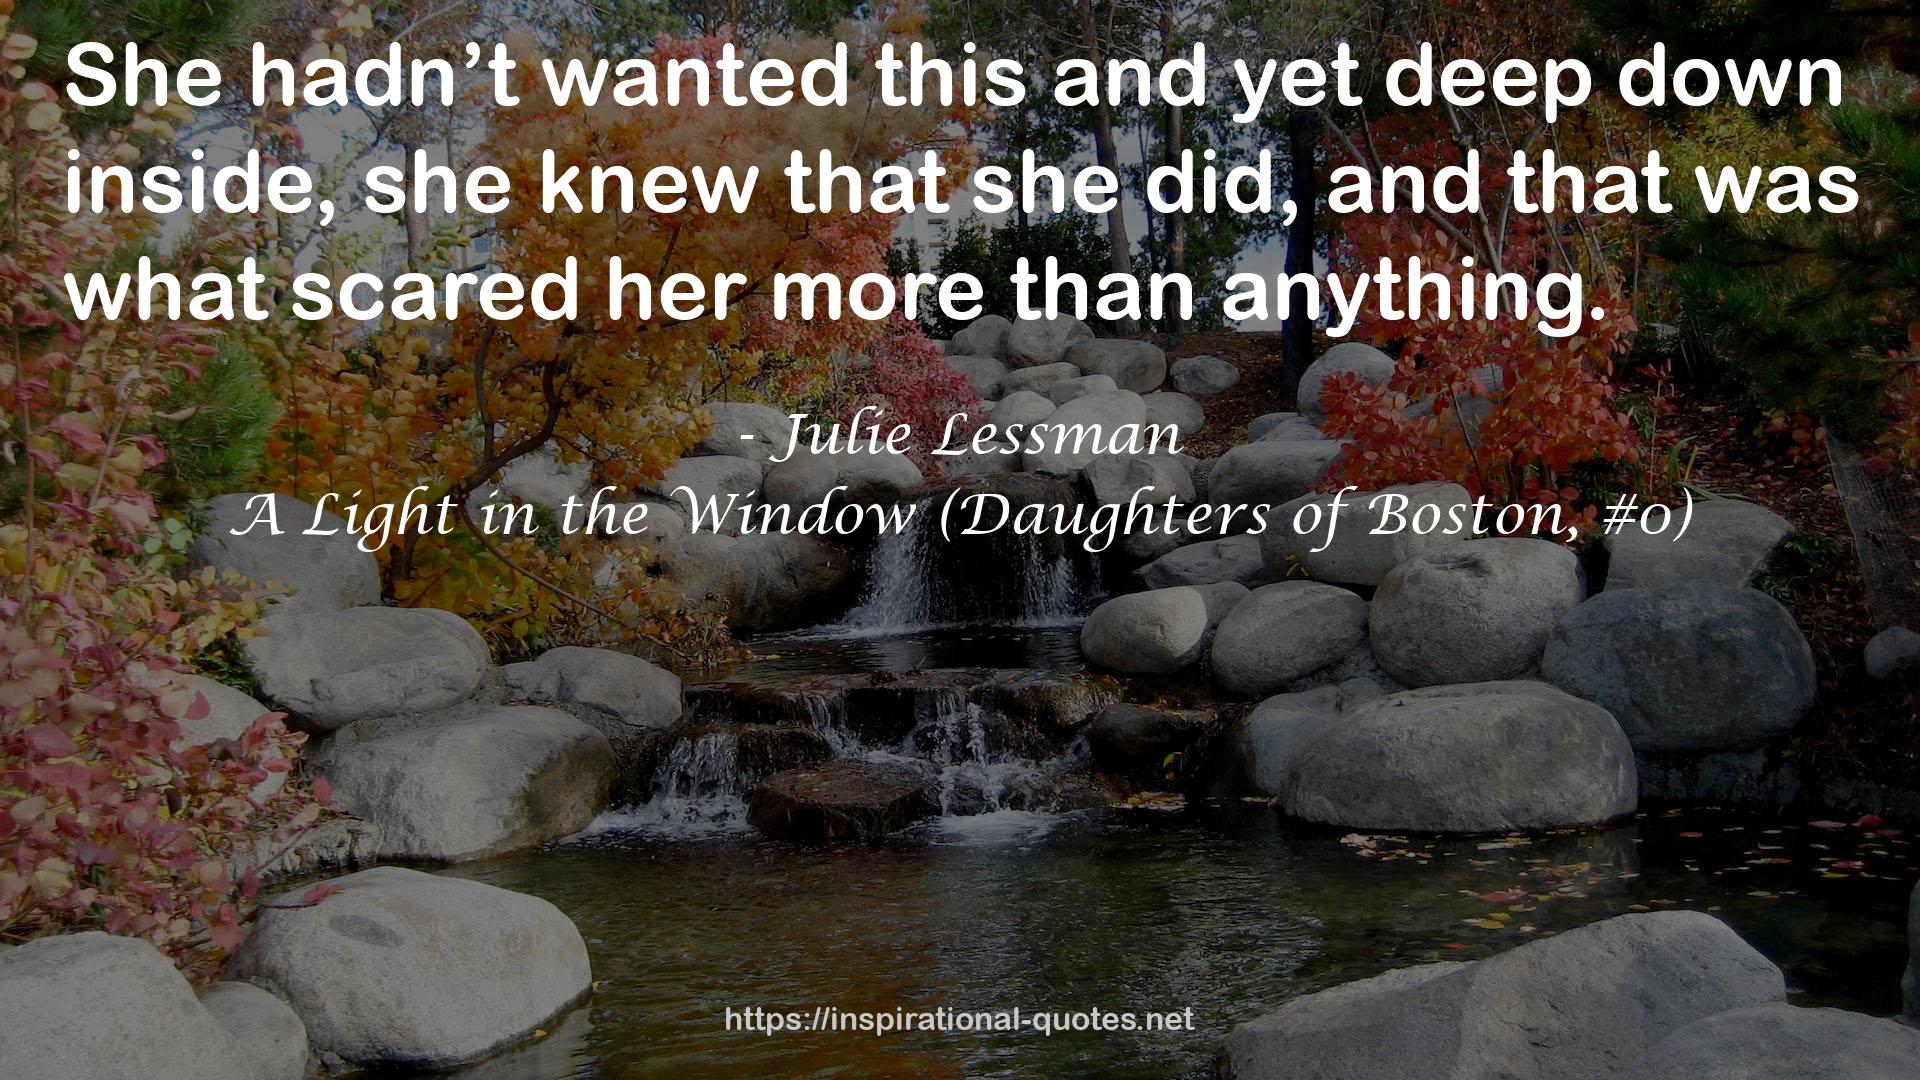 A Light in the Window (Daughters of Boston, #0) QUOTES